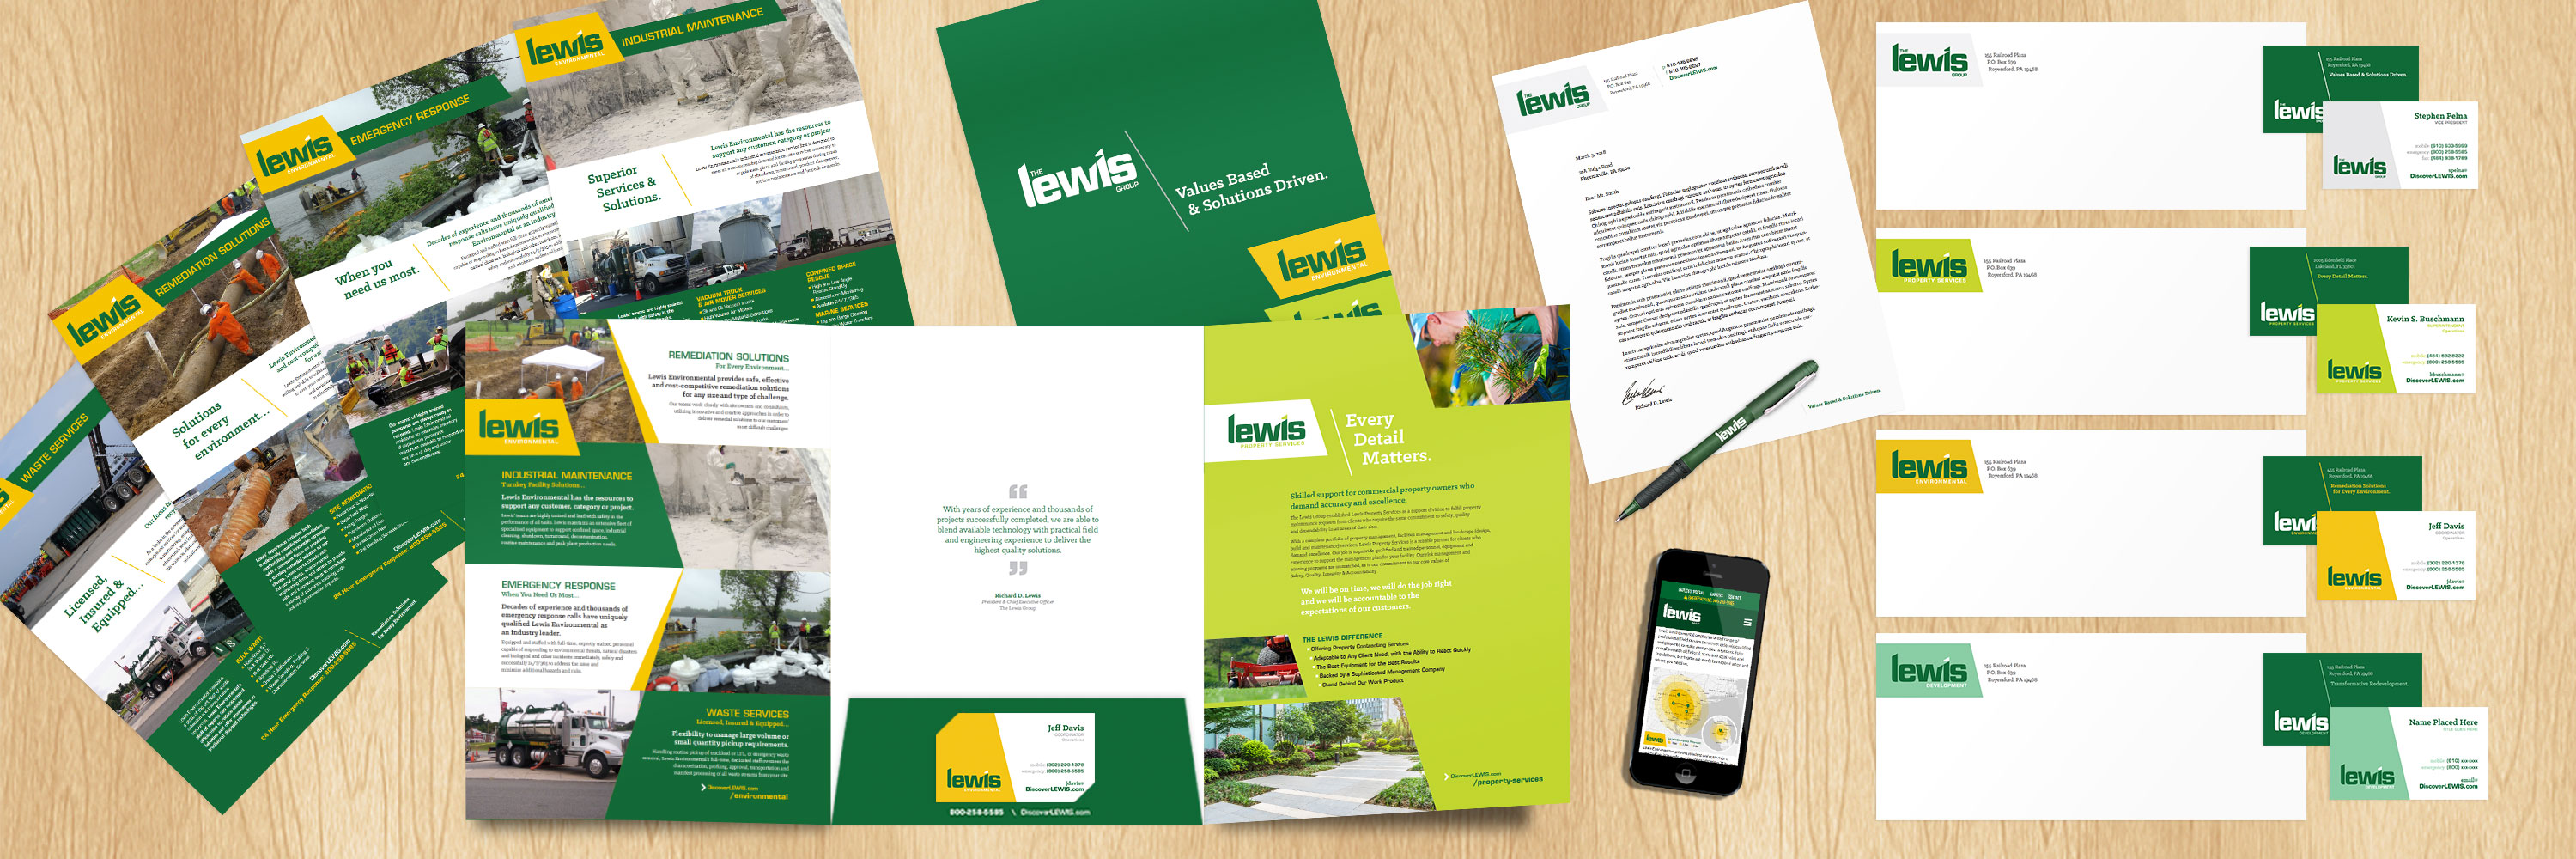 Lewis Group Corporate Collateral and Stationery System